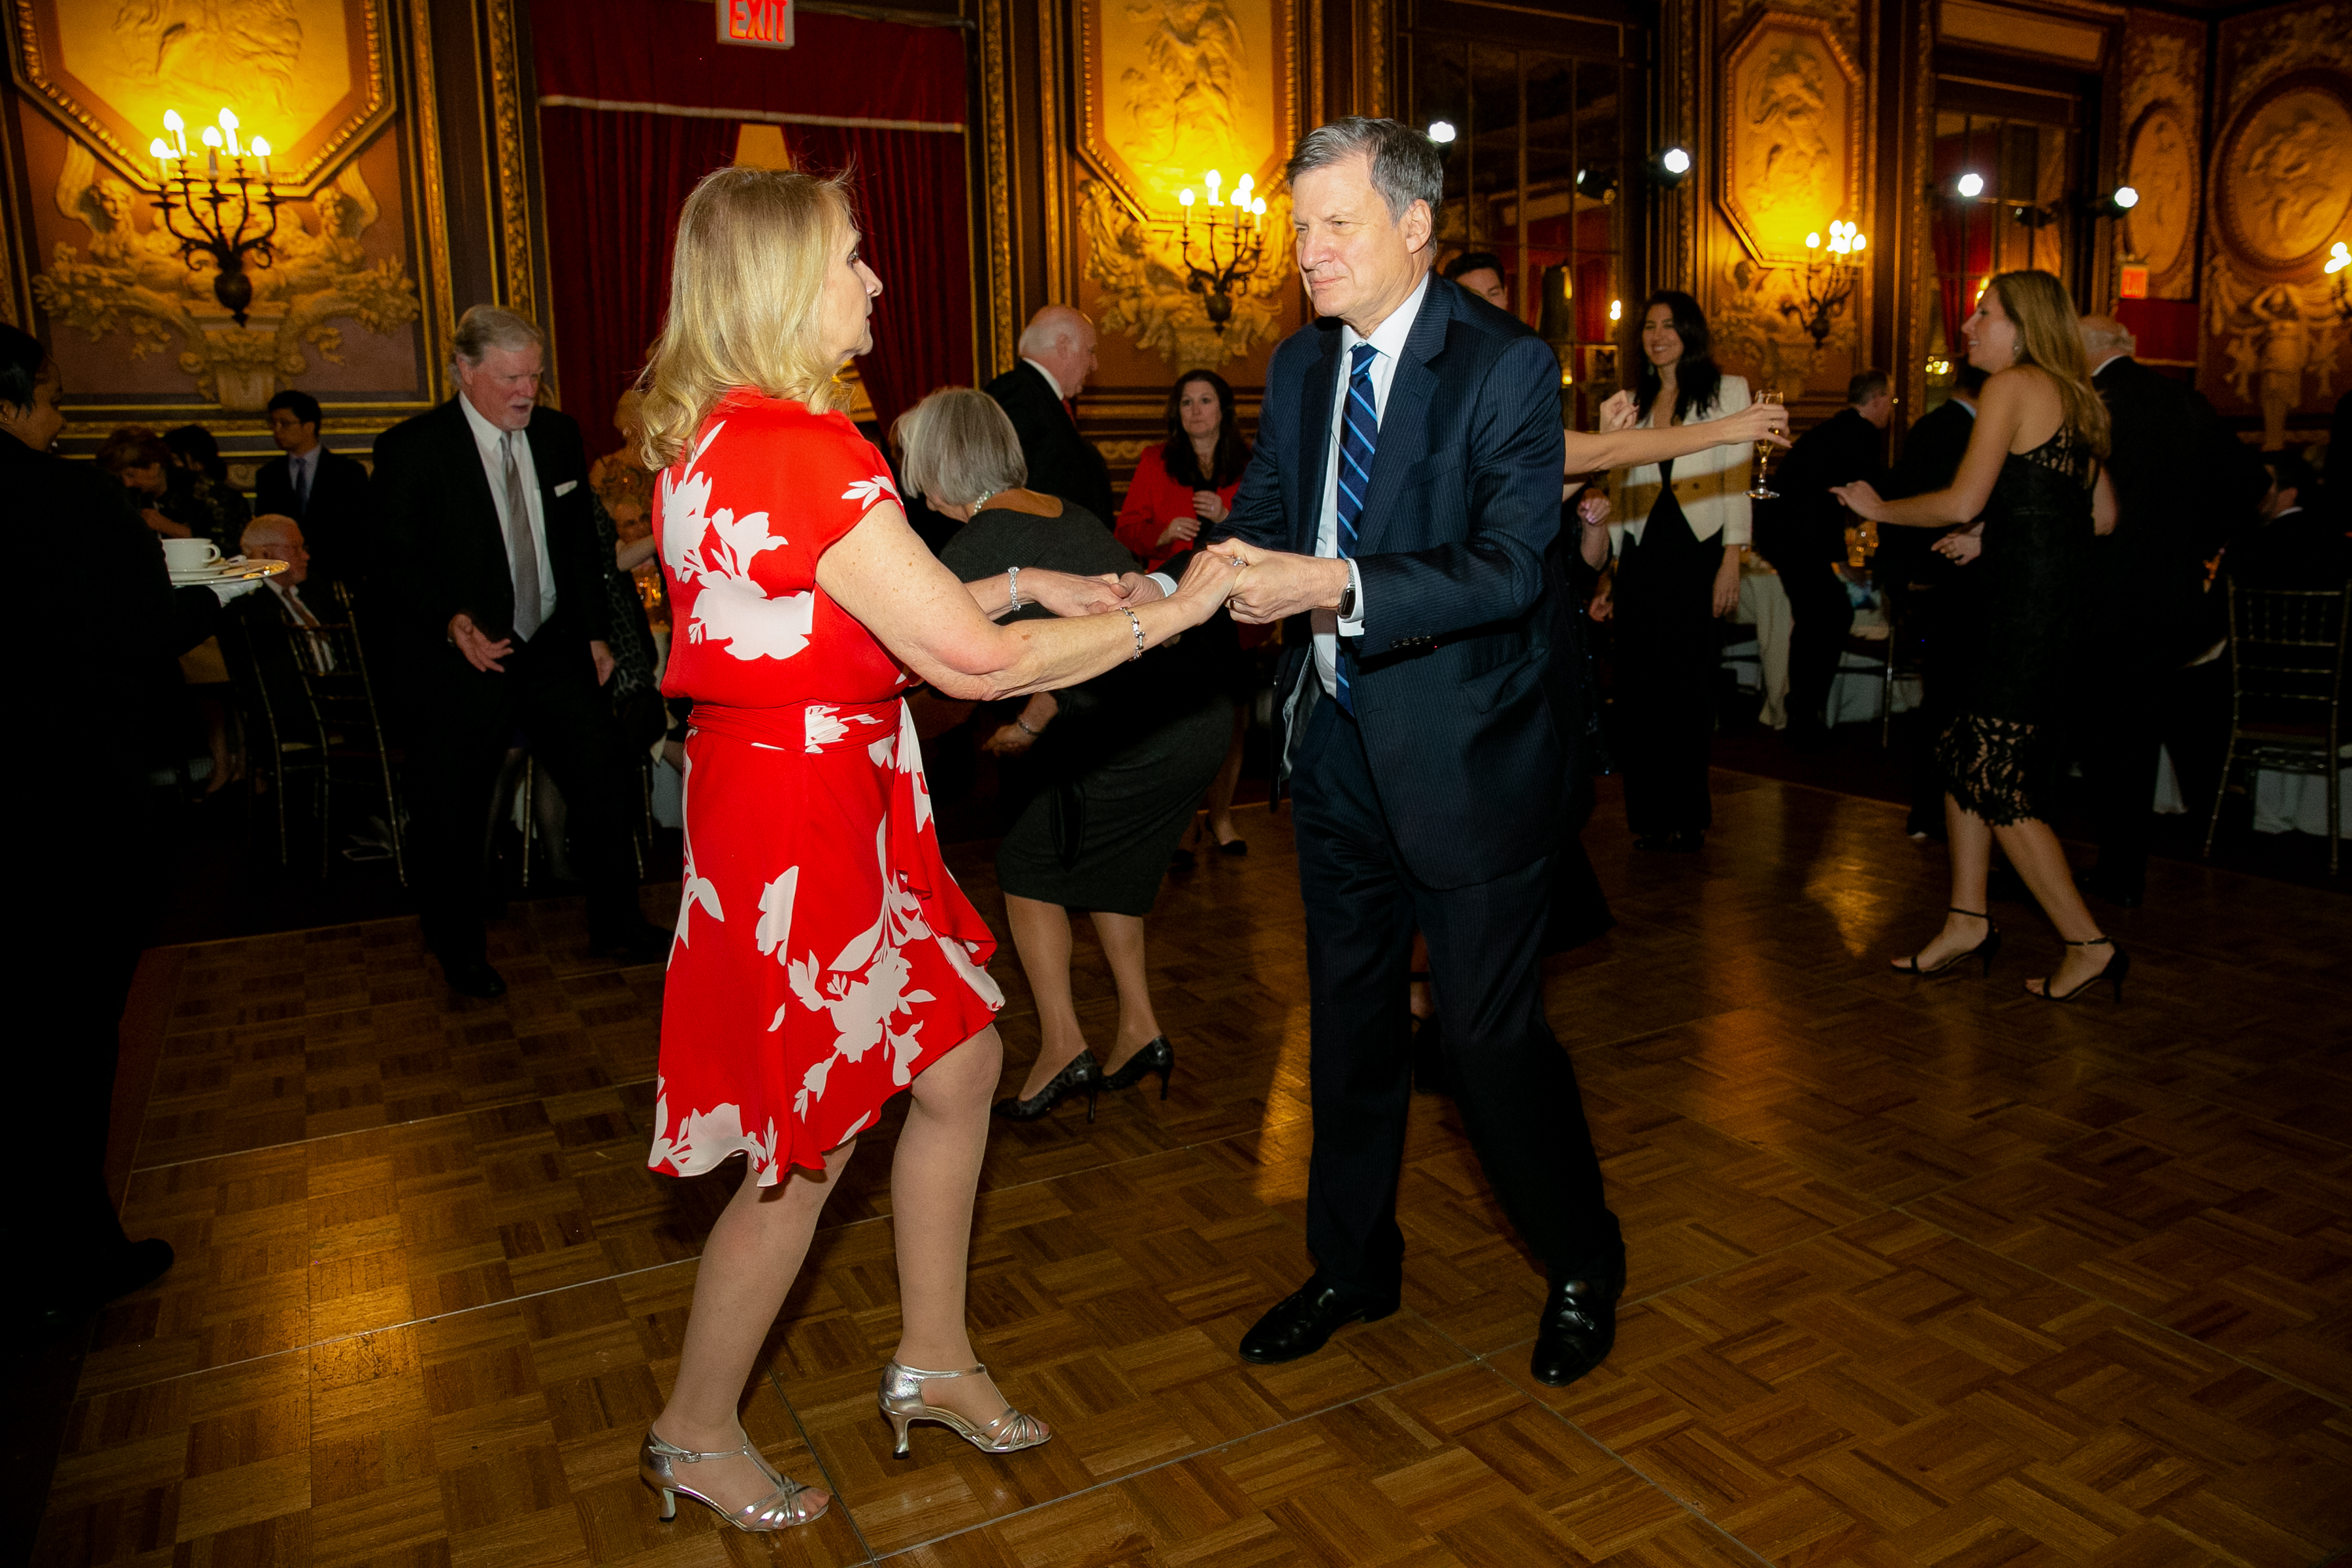 A man and a woman dancing with people behind them at 2019 Gala